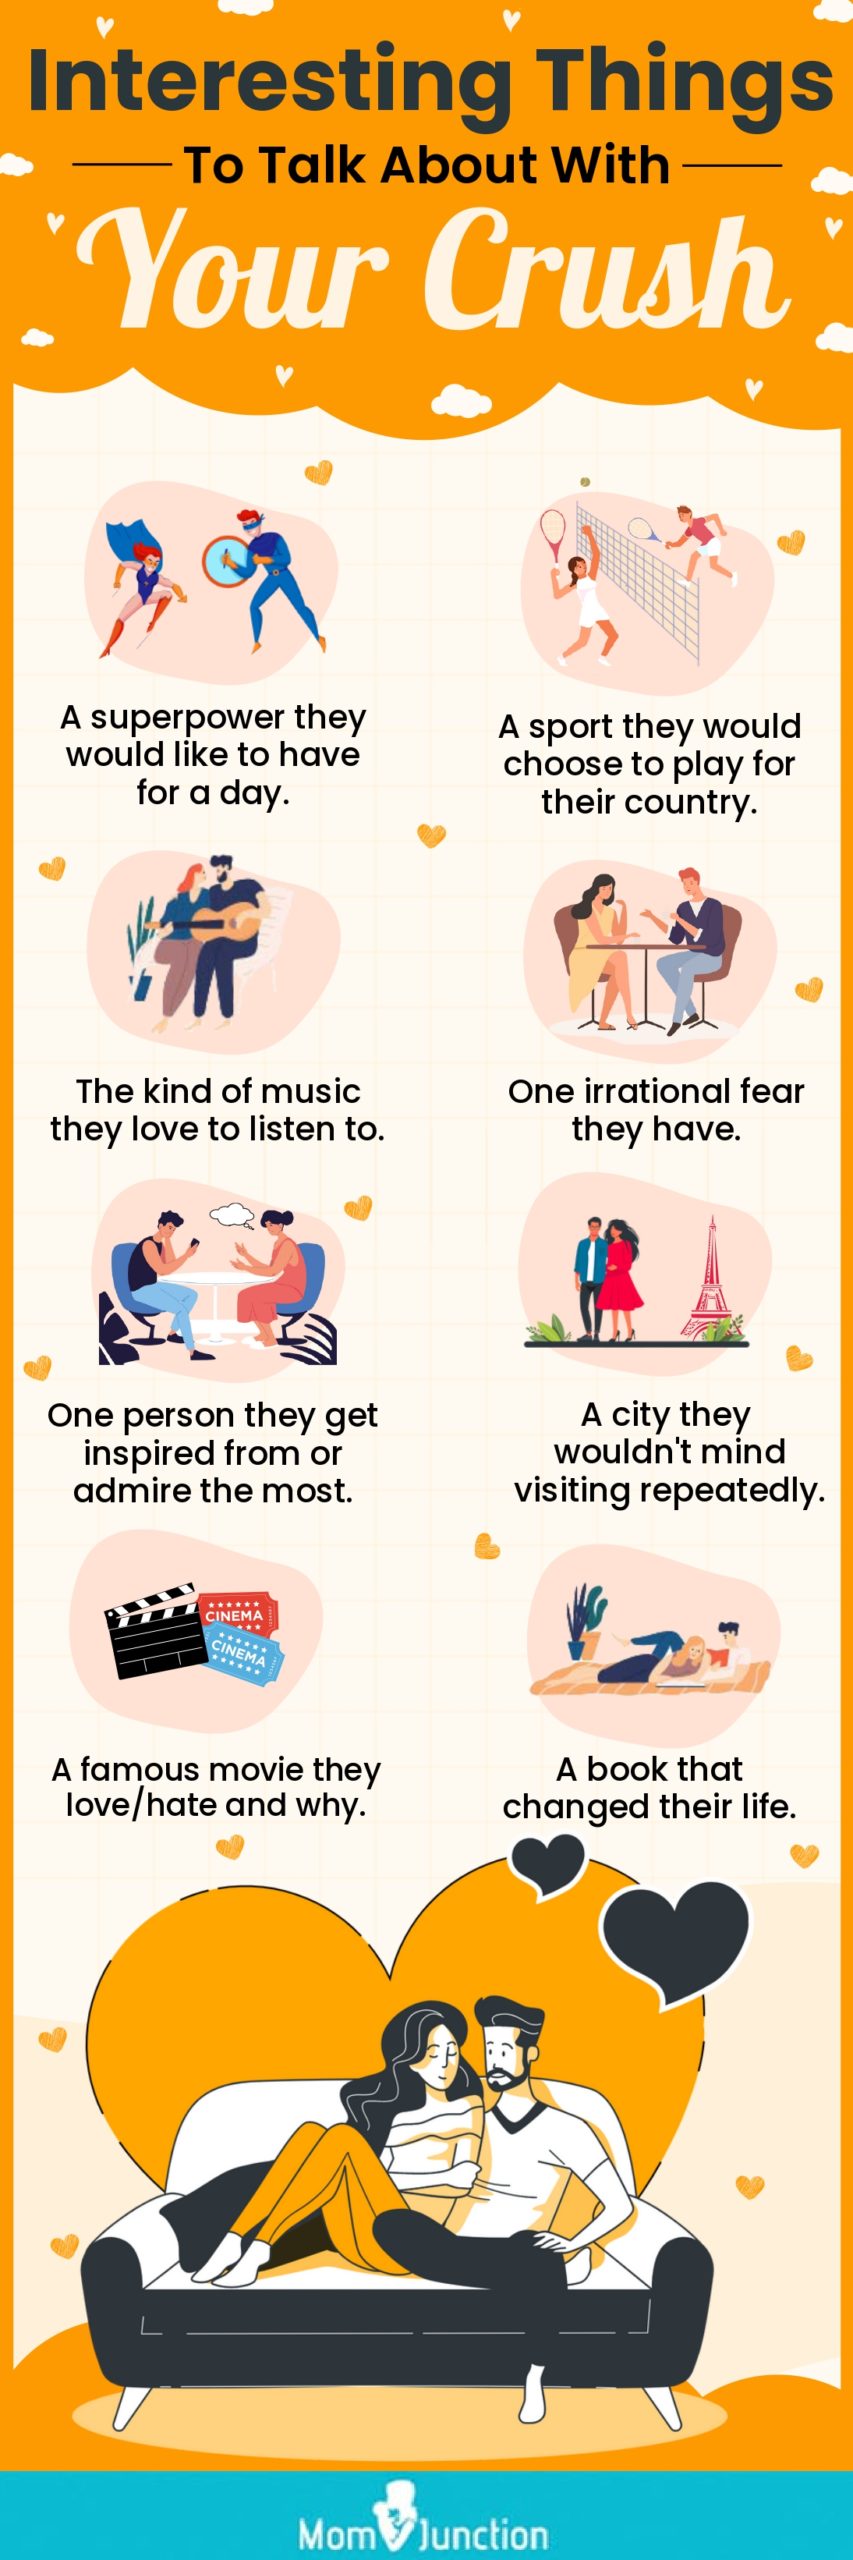 interesting things to talk about with your crush (infographic)